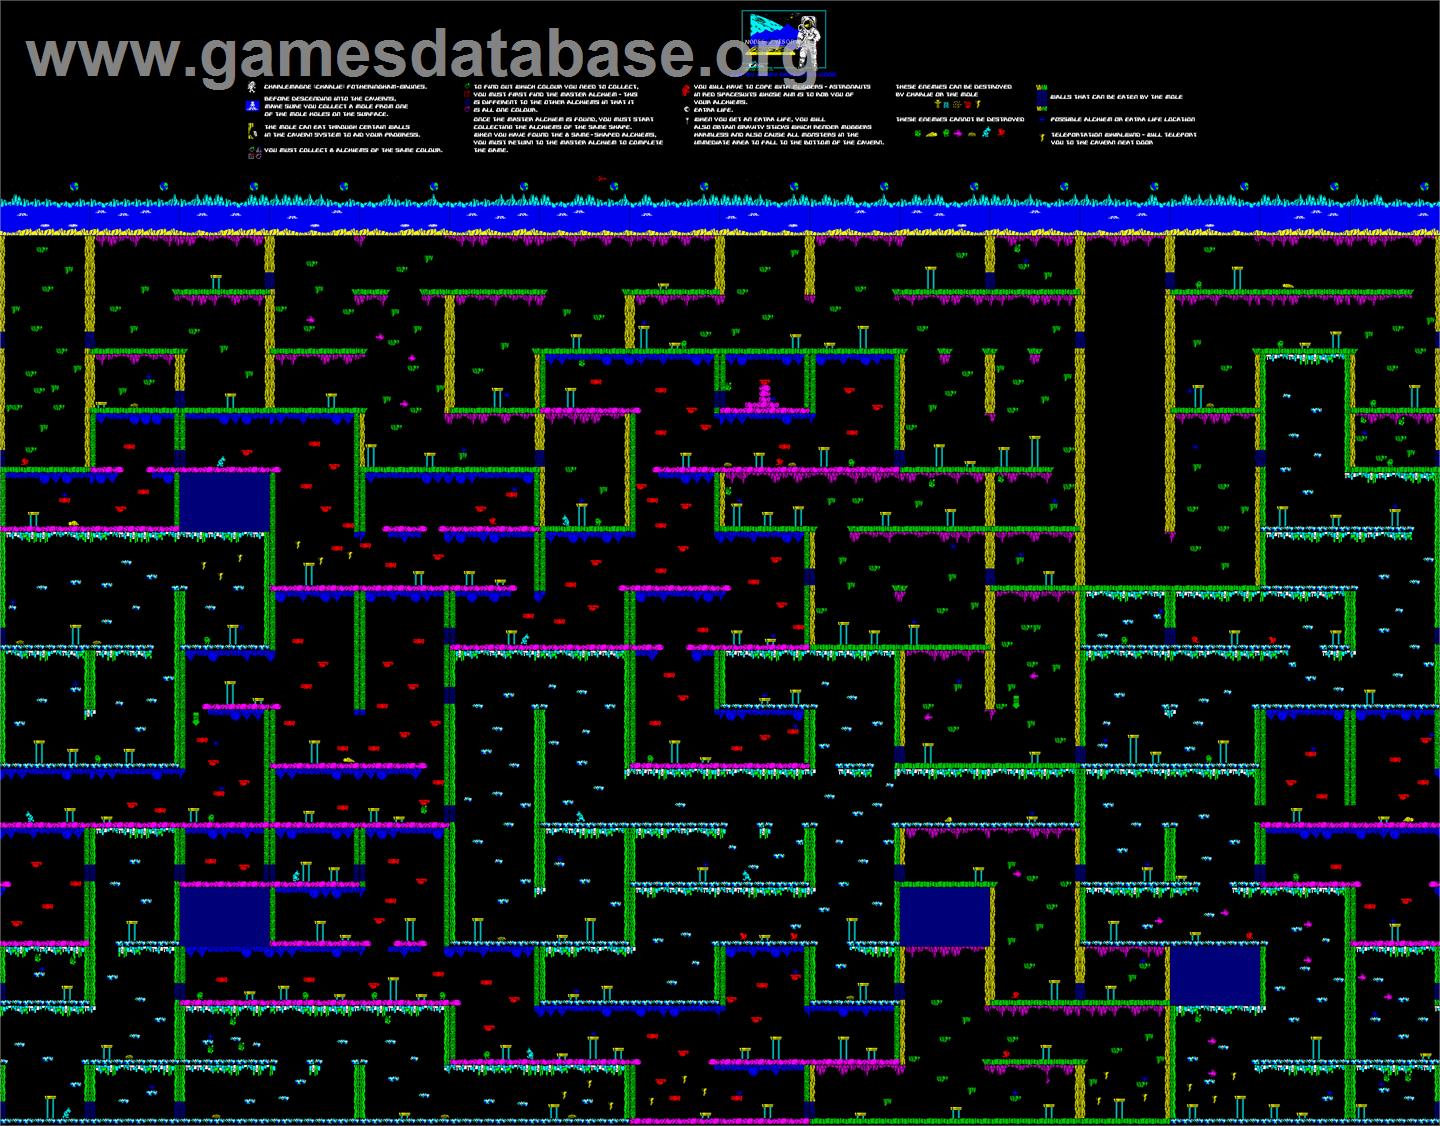 Nodes of Yesod - Commodore 64 - Artwork - Map